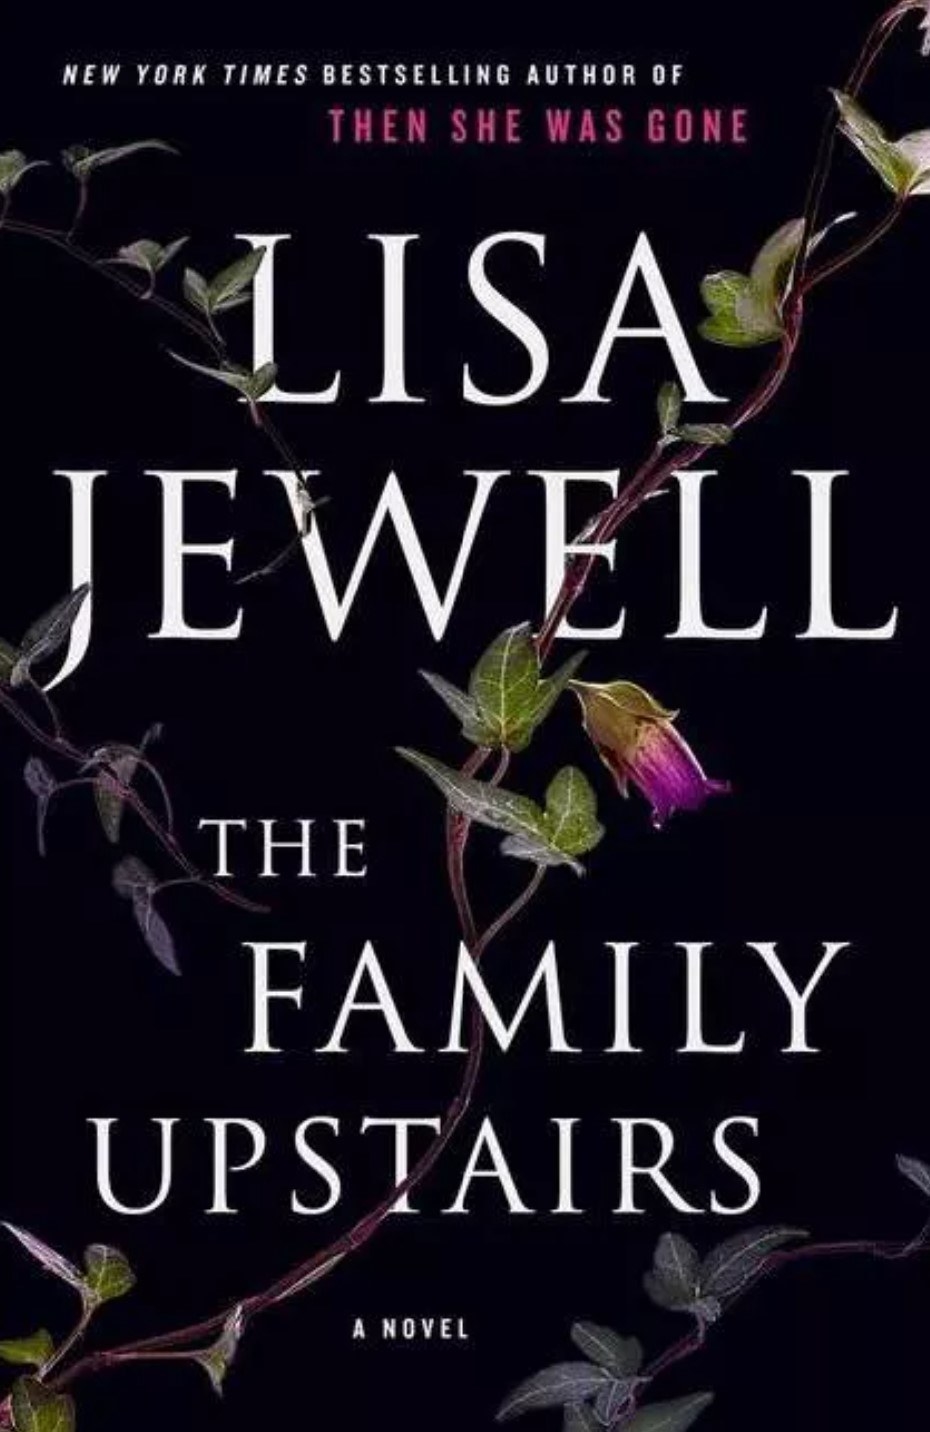 The cover of The Family Upstairs by Lisa Jewell